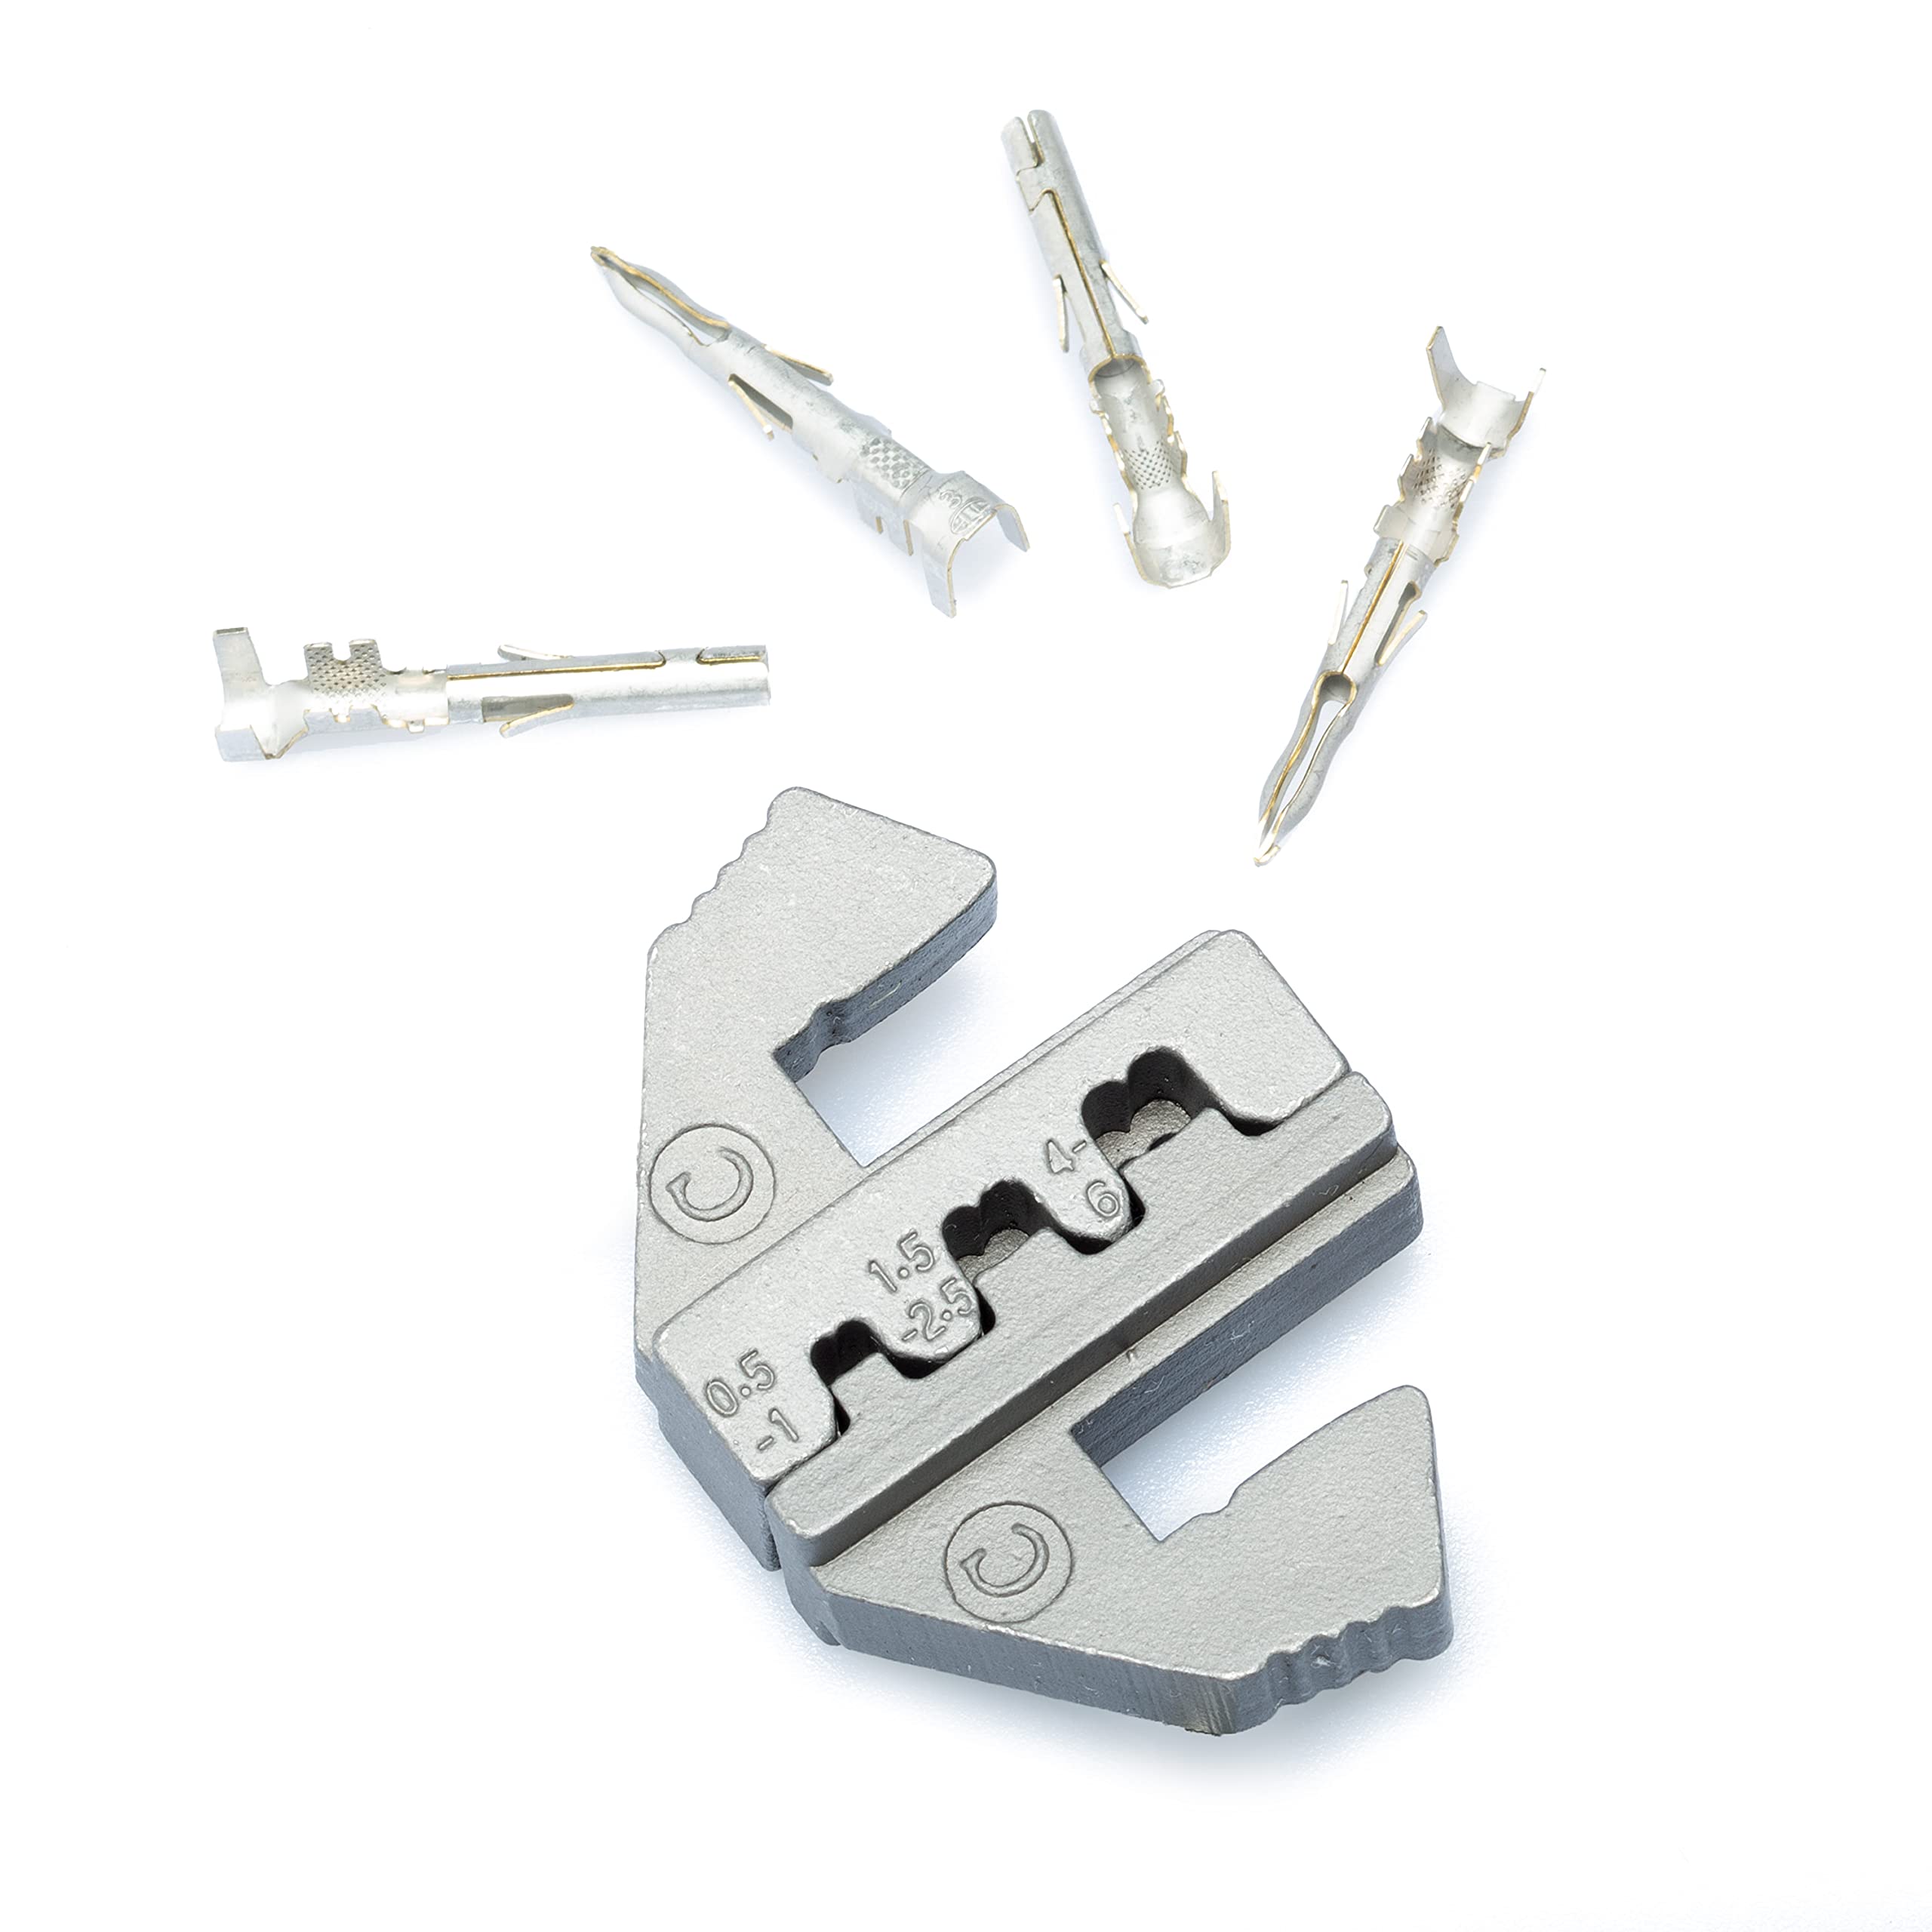 Wirefy Crimping Die For Open Barrel Terminals - 20-10 Awg